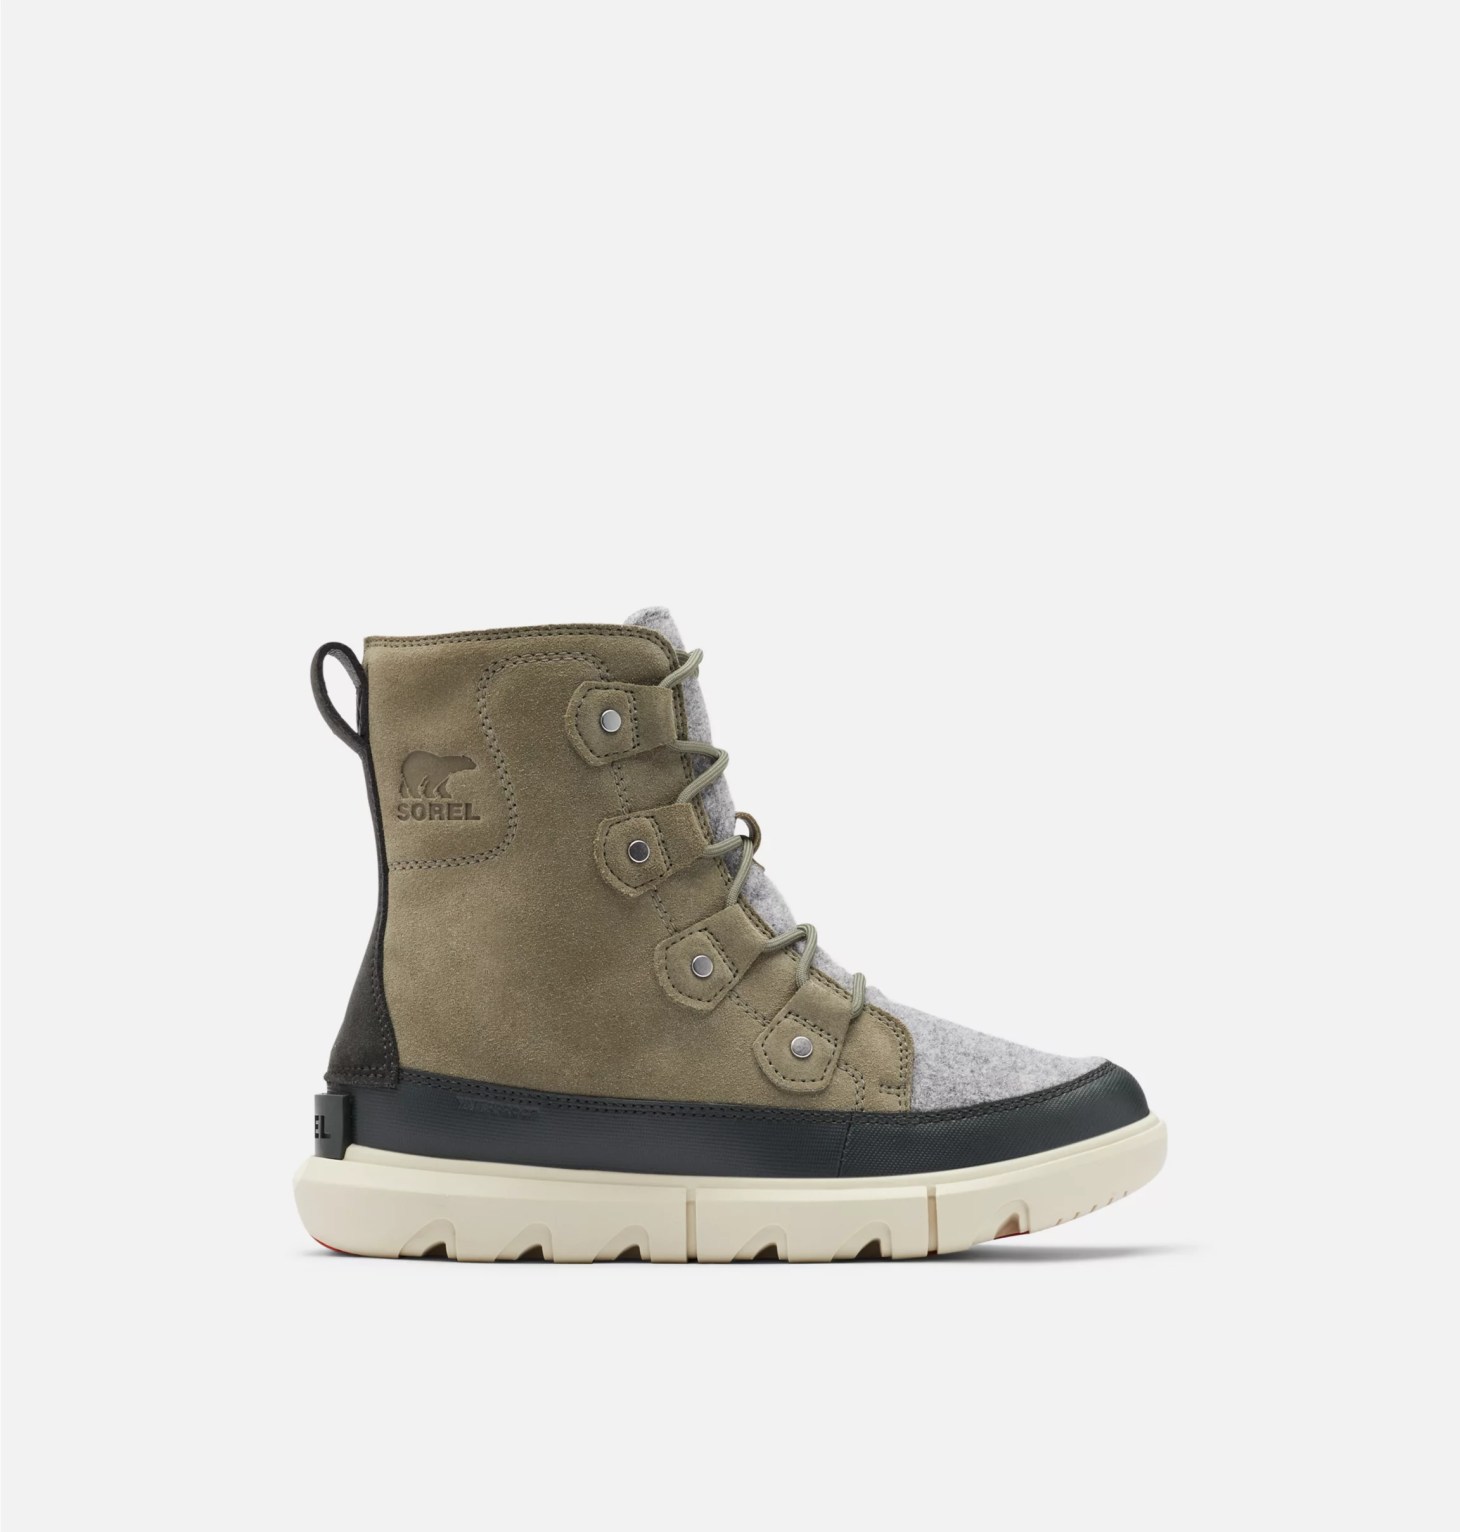 sorel explorer boot in sage and black on a grey background